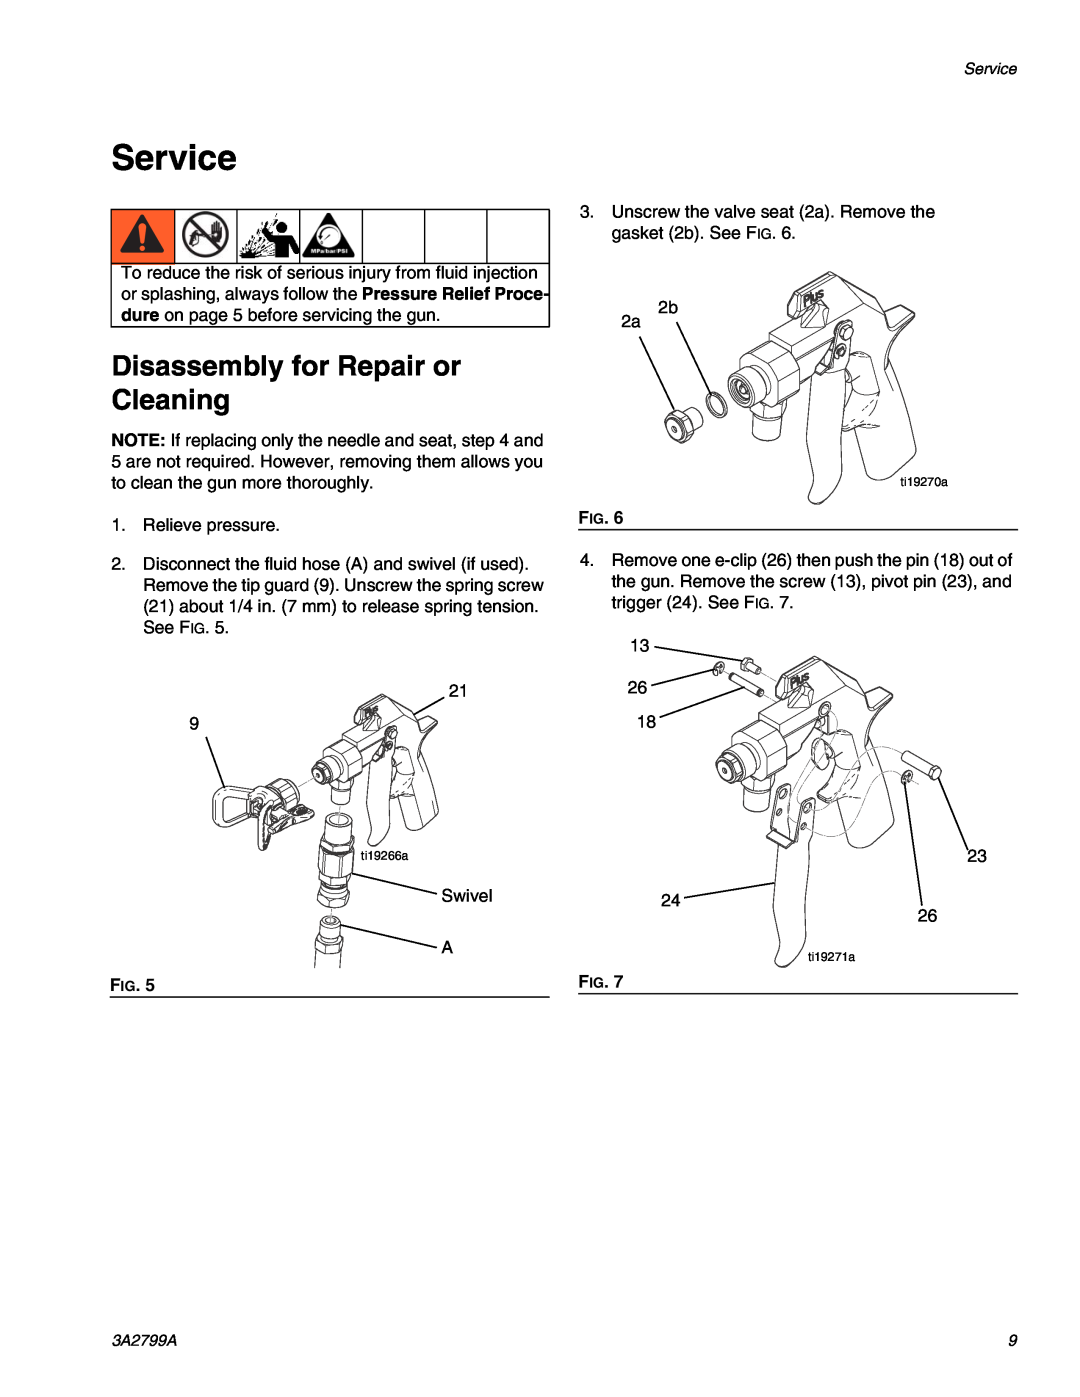 Graco 262854, Series A important safety instructions Service, Disassembly for Repair or Cleaning 